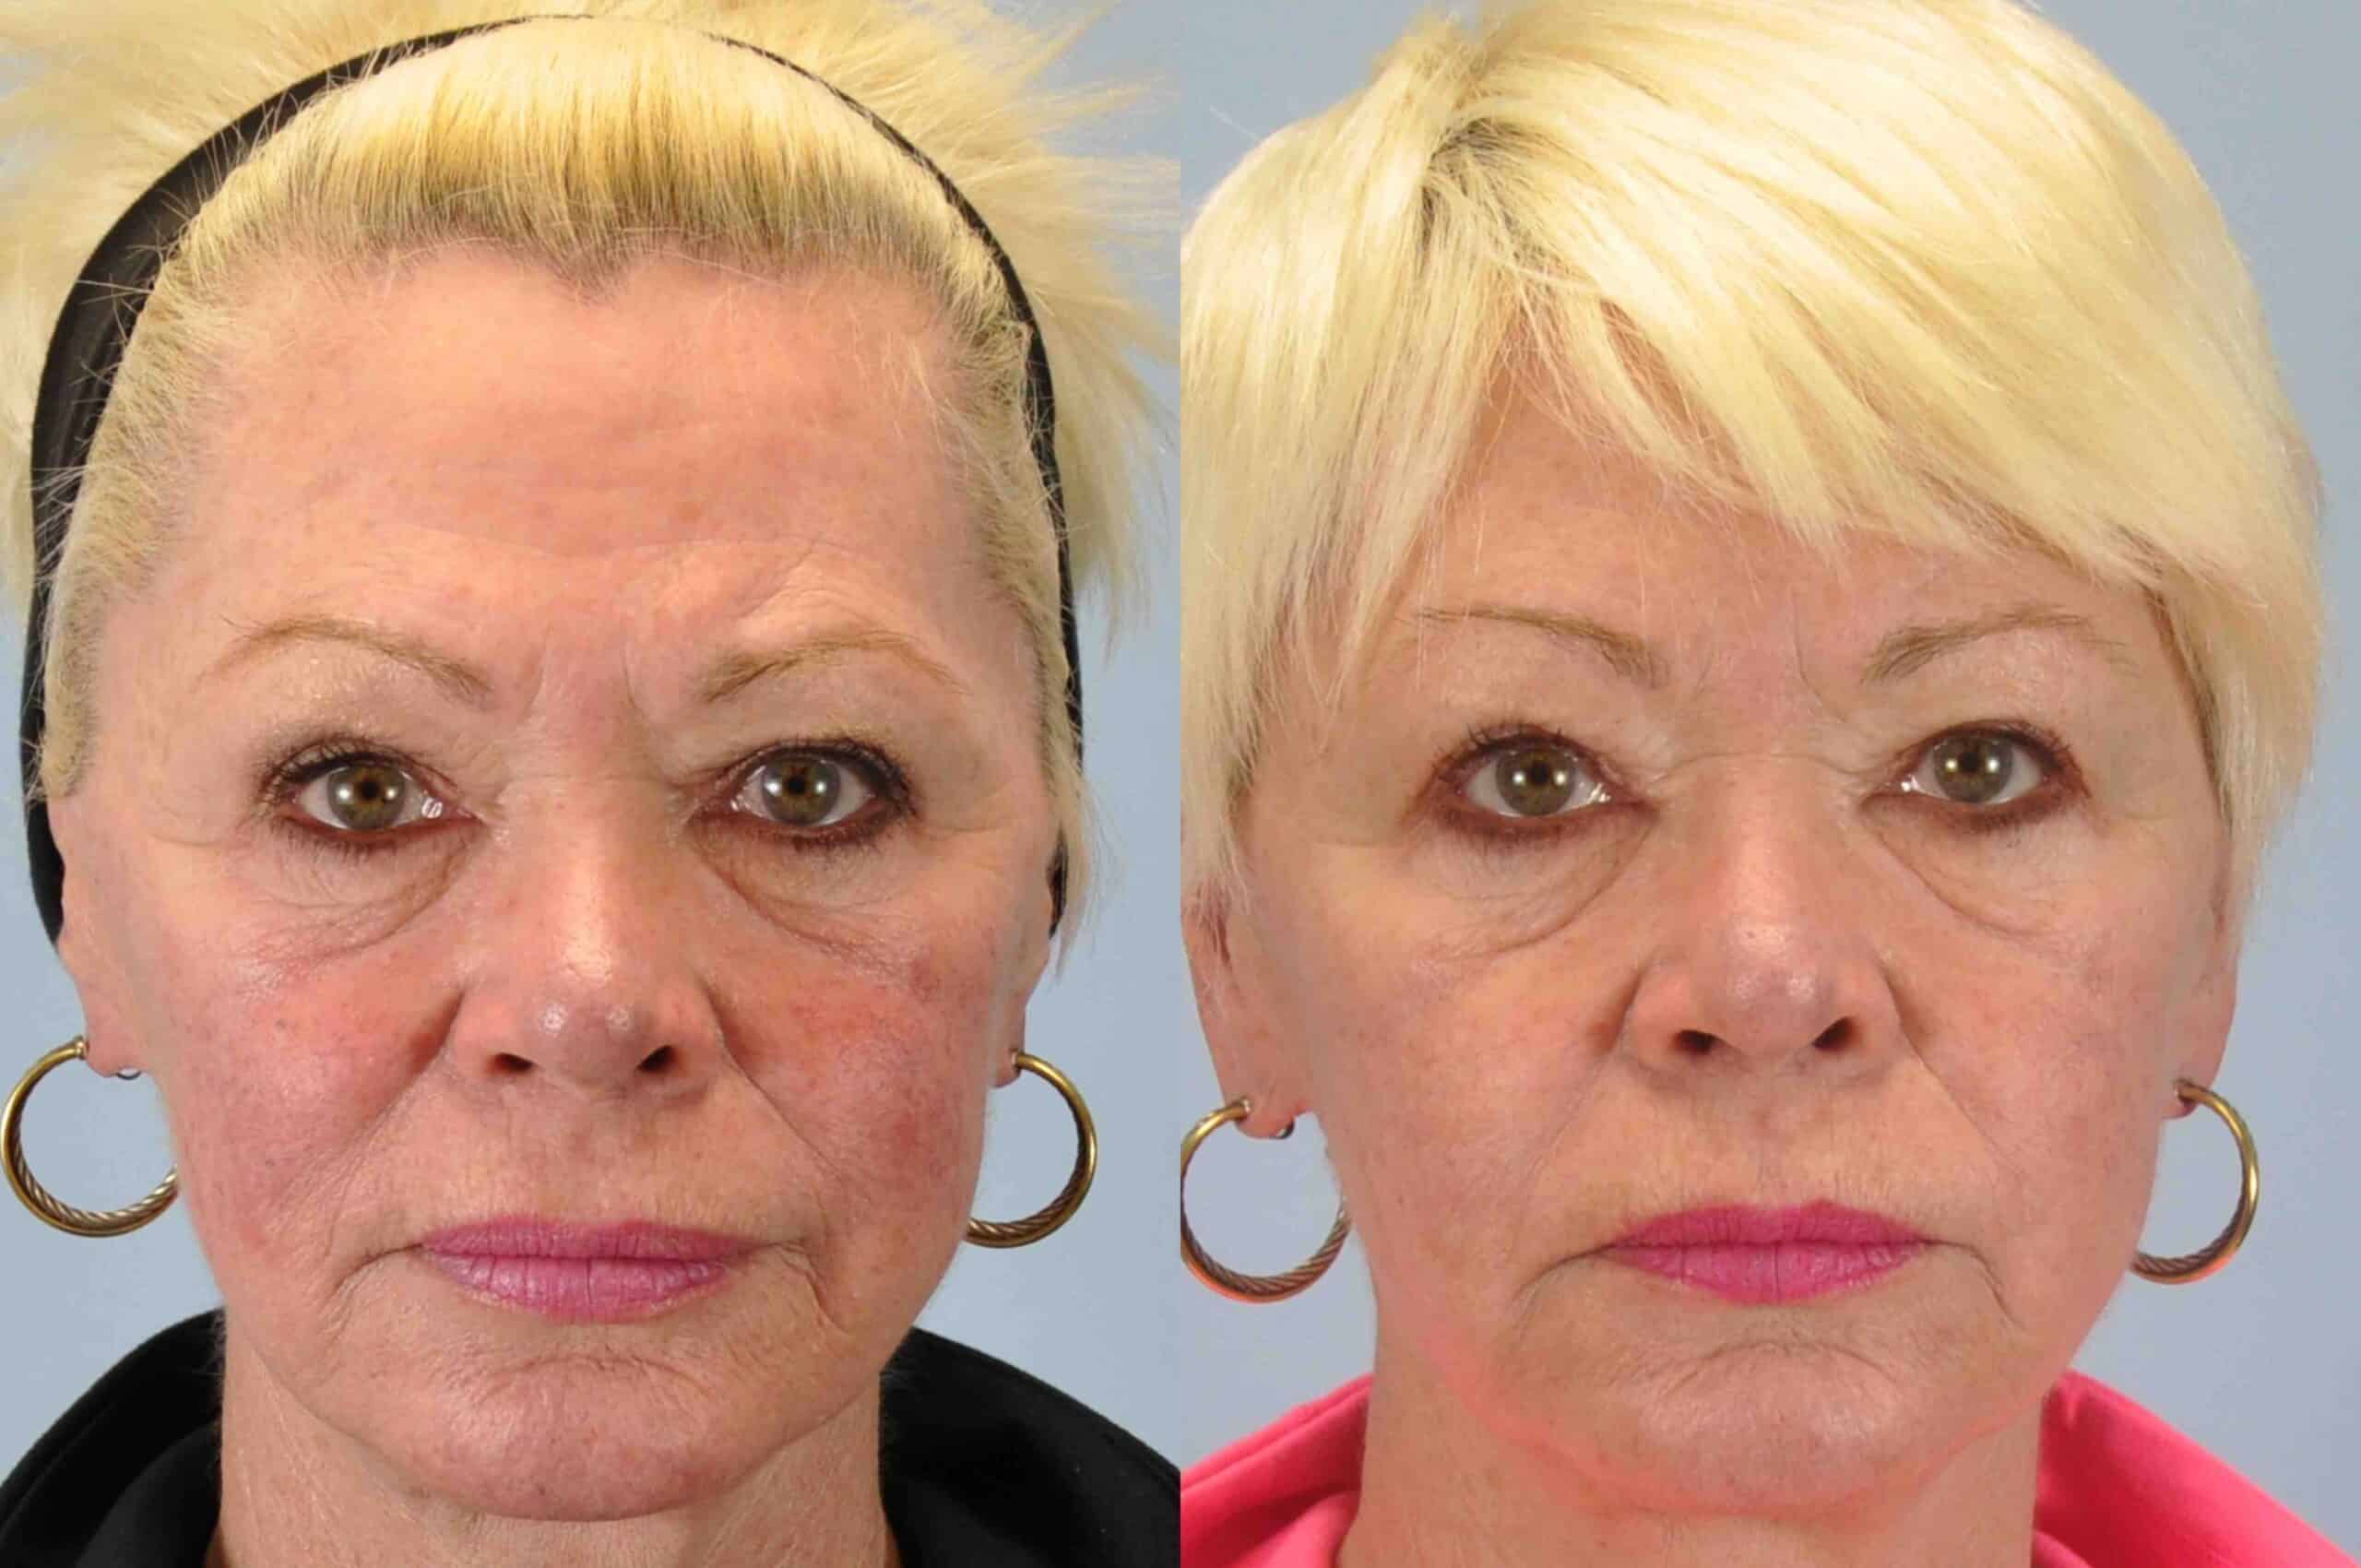 Before and after, 2 mo post-treatment from Laser Resurfacing performed by Dr. Paul Vanek